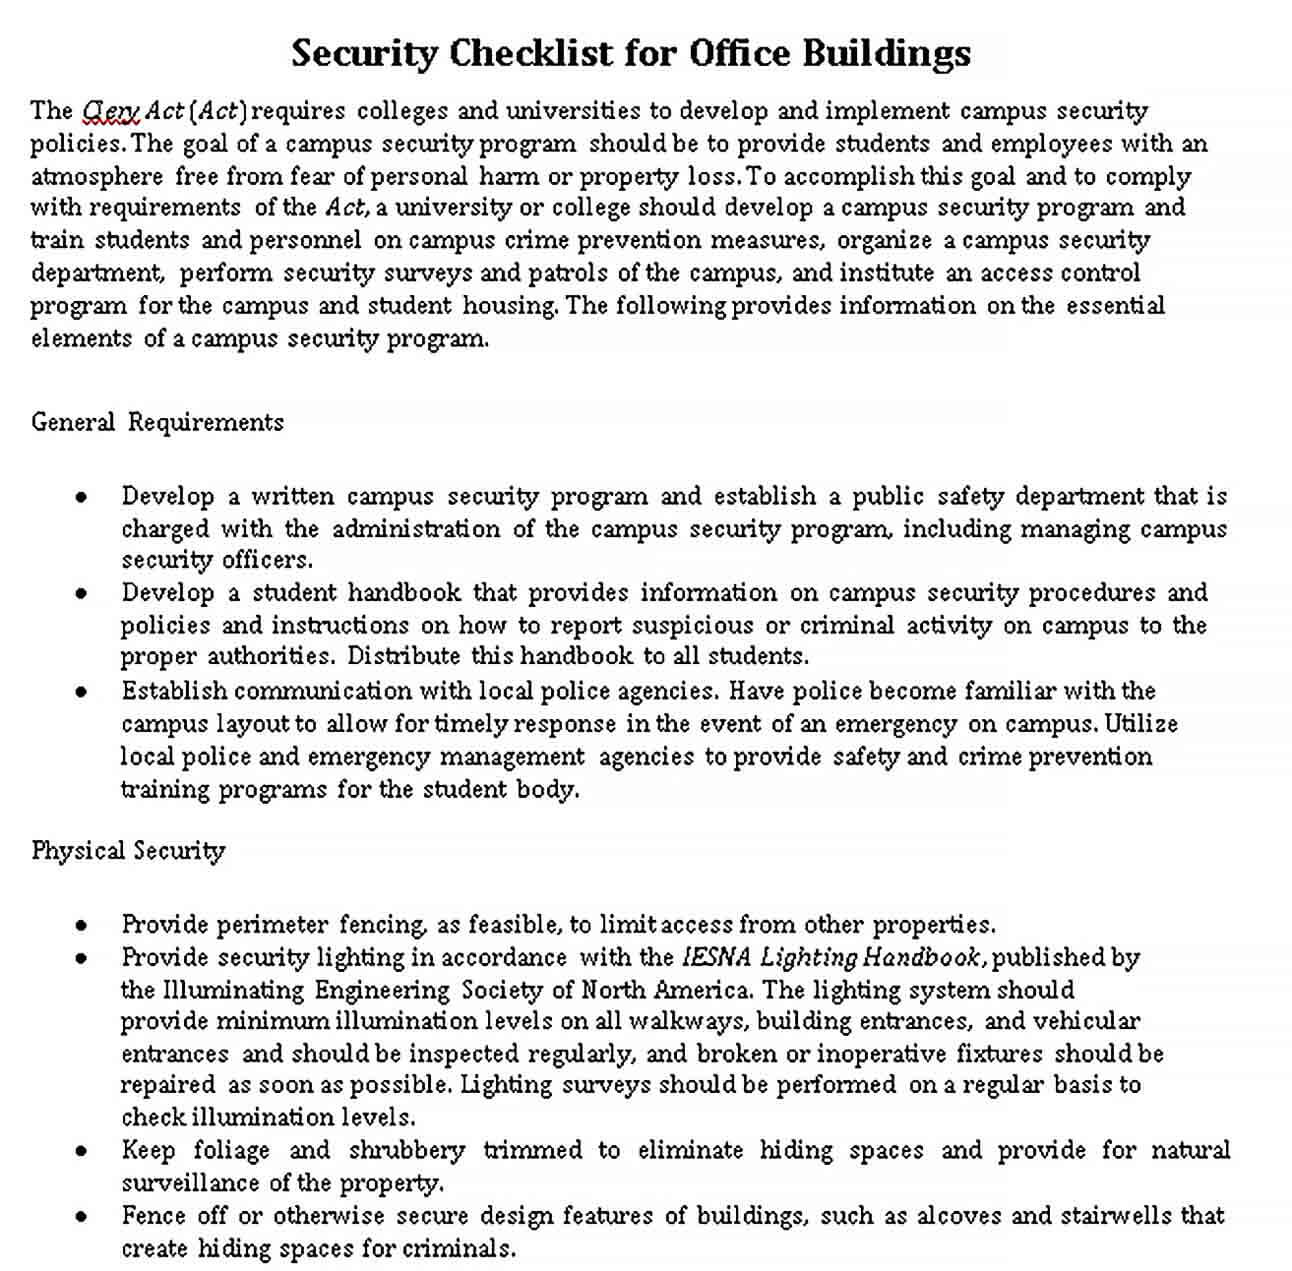 Sample Security Checklist for Office Buildings Template